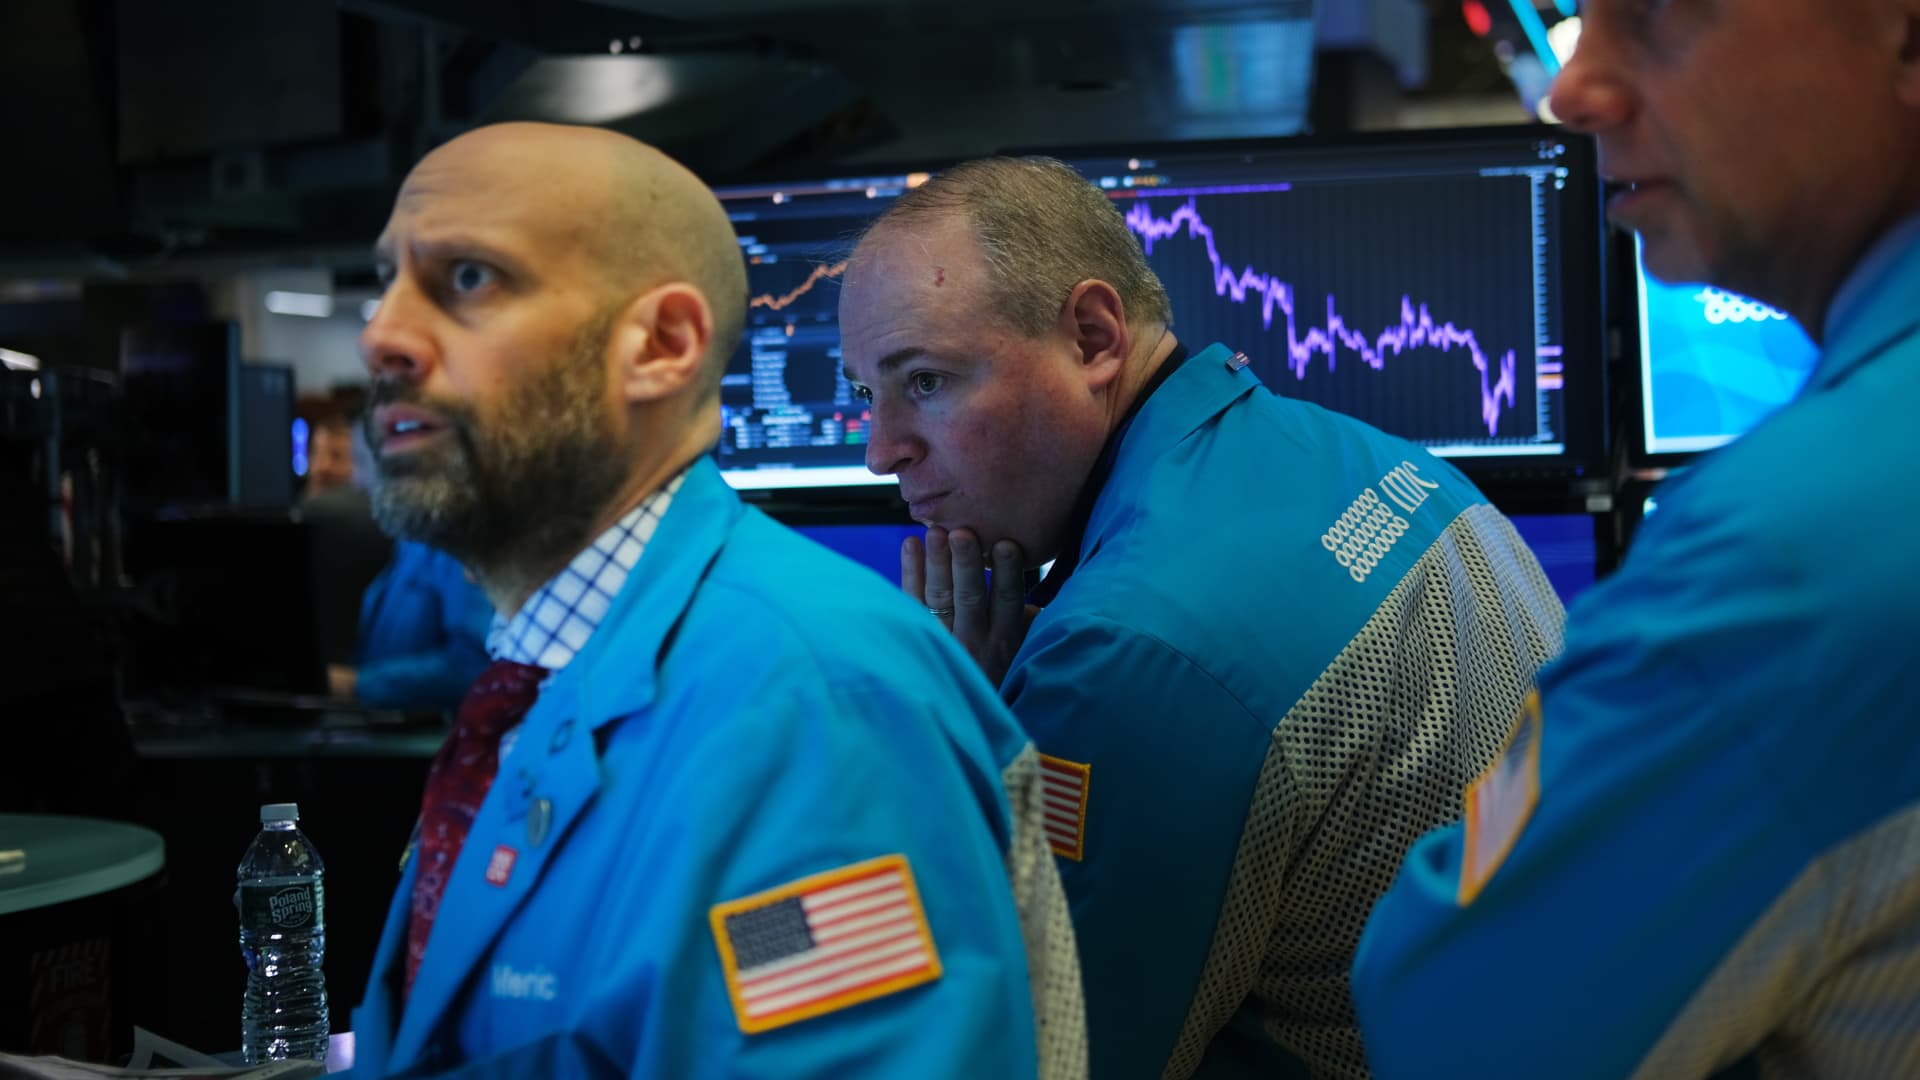 Dow drops 300 points, breaks below 30,000 on fear the Fed is overdoing its inflation fight - CNBC